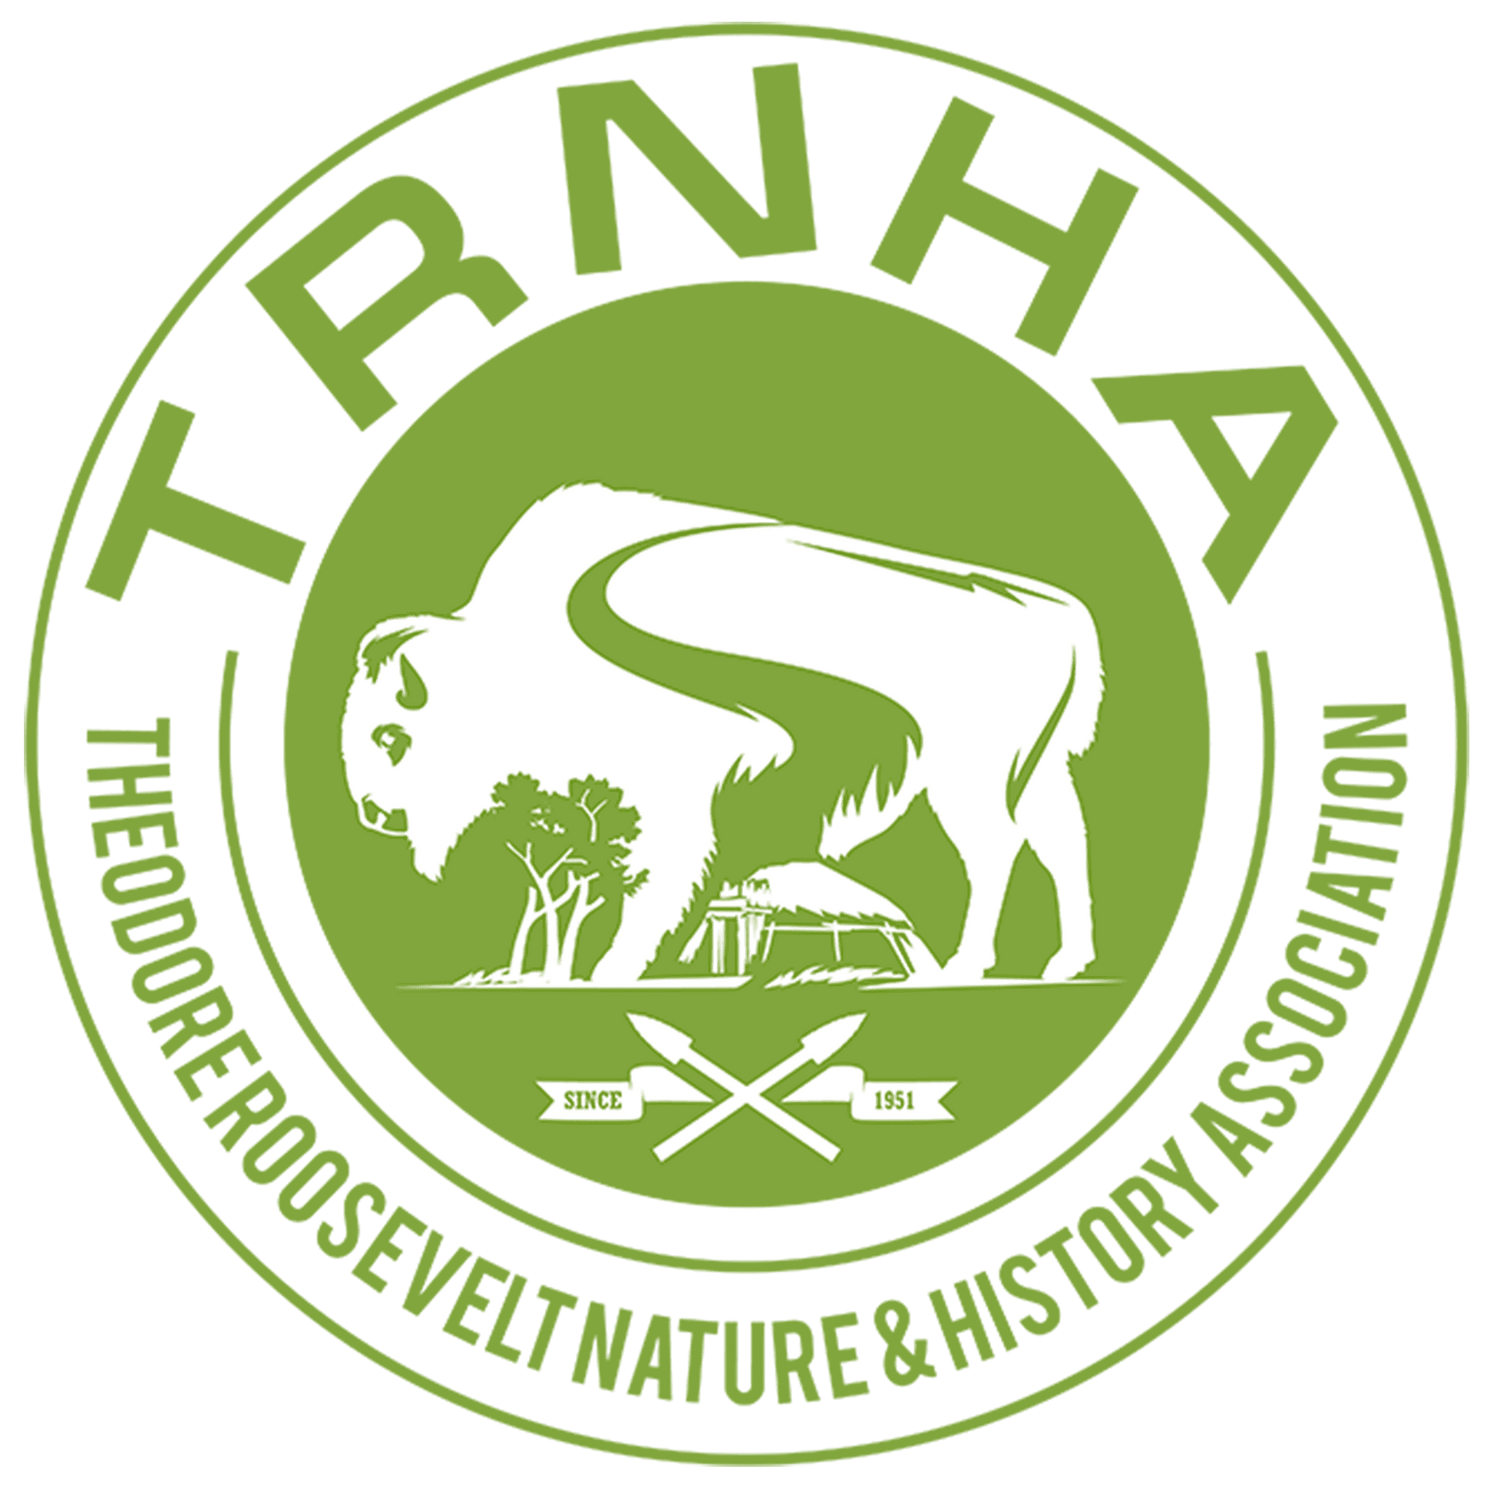 Theodore Roosevelt Nature and History Association